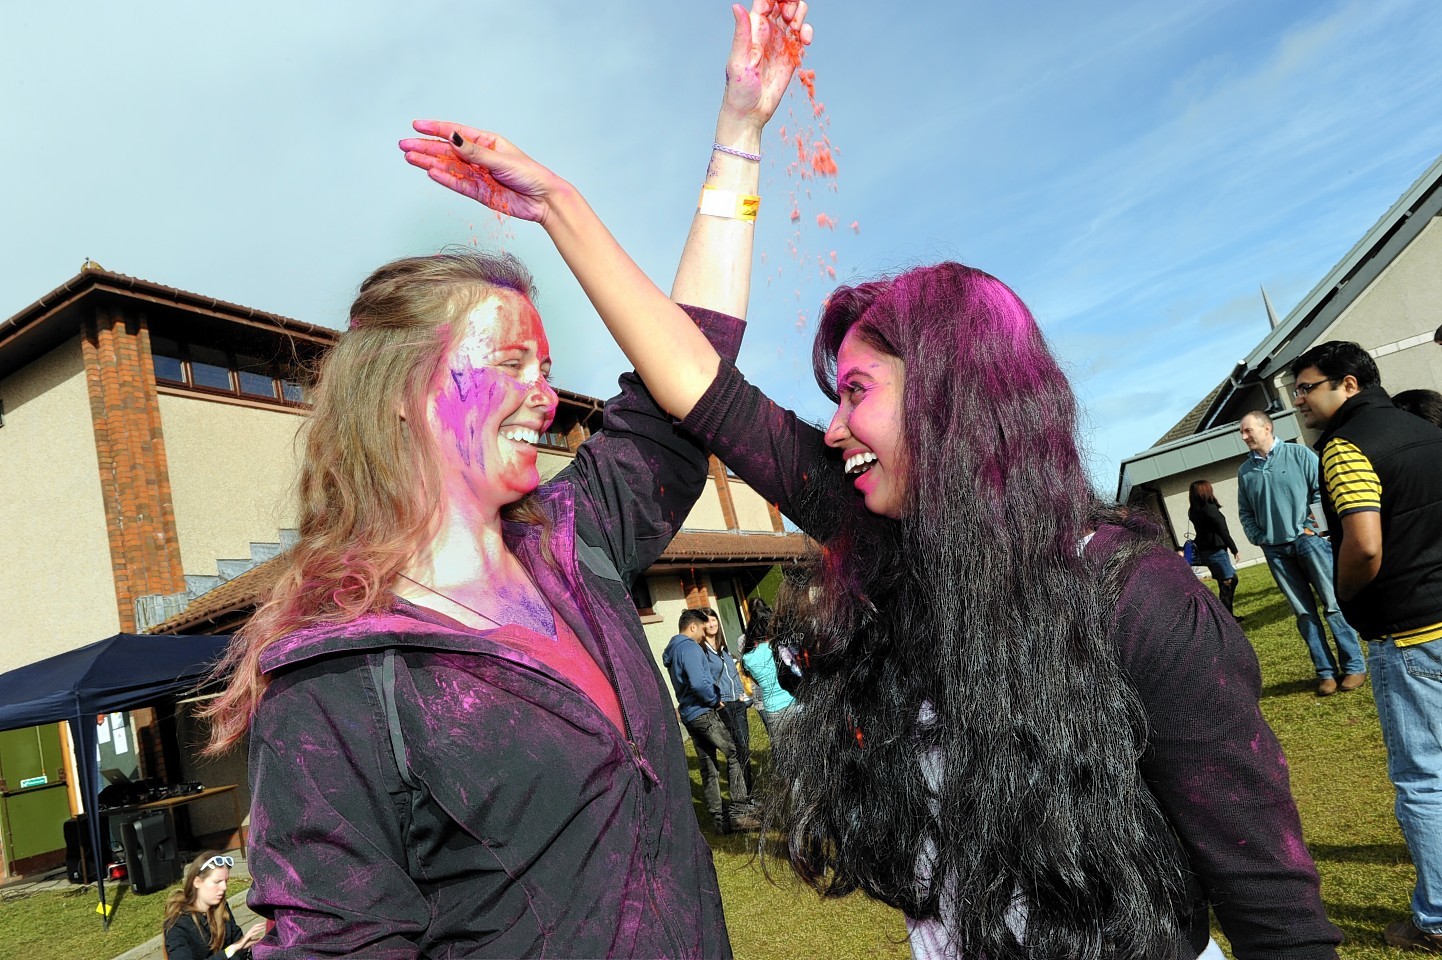 Hundreds turned up to celebrate India's Holi festival in Westhill yesterday